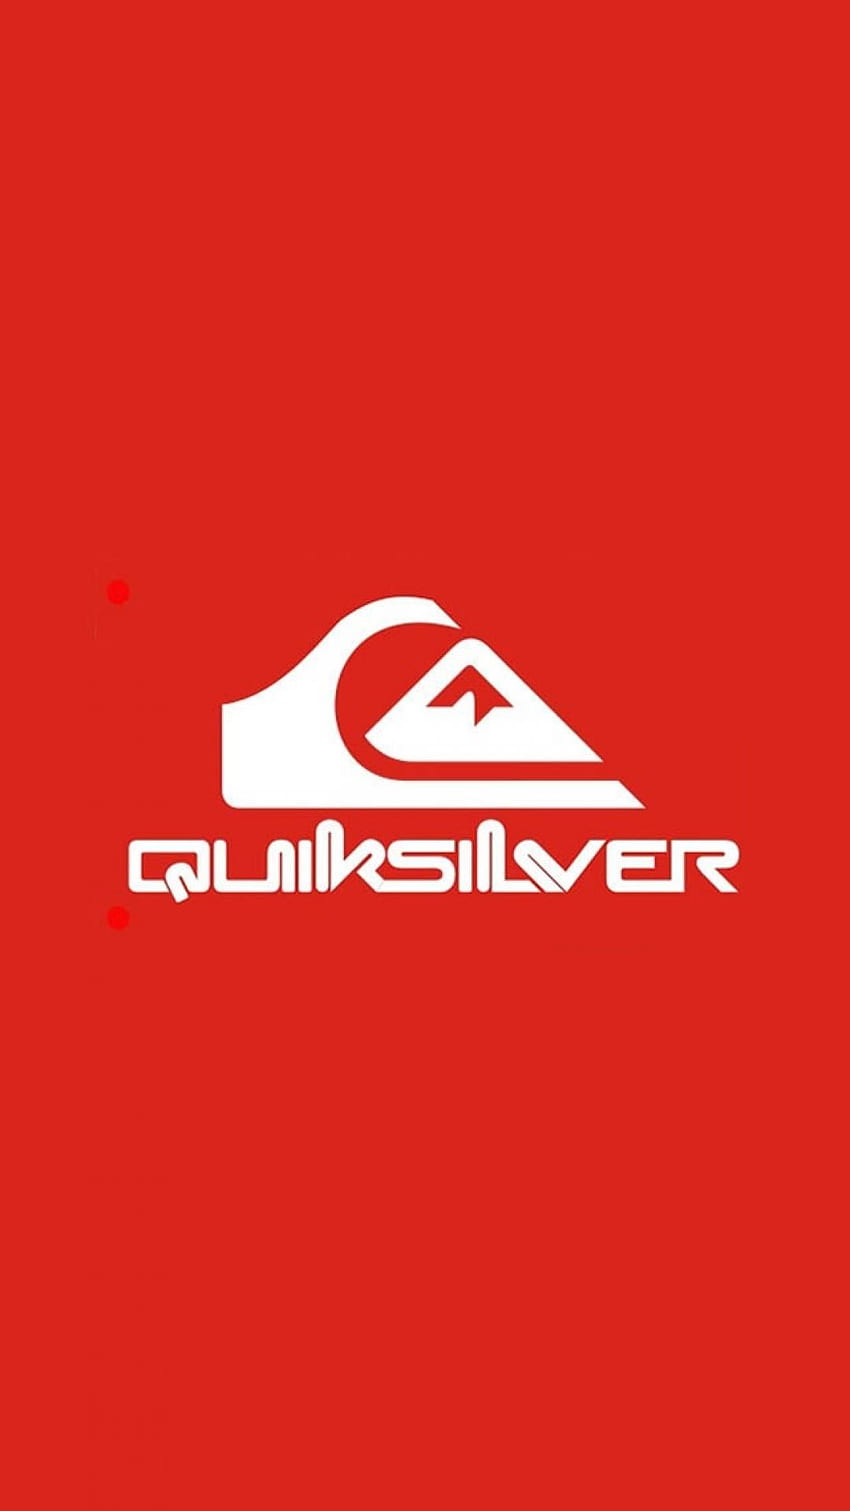 400+ Quiksilver Hd Wallpaper For Android - MyWeb